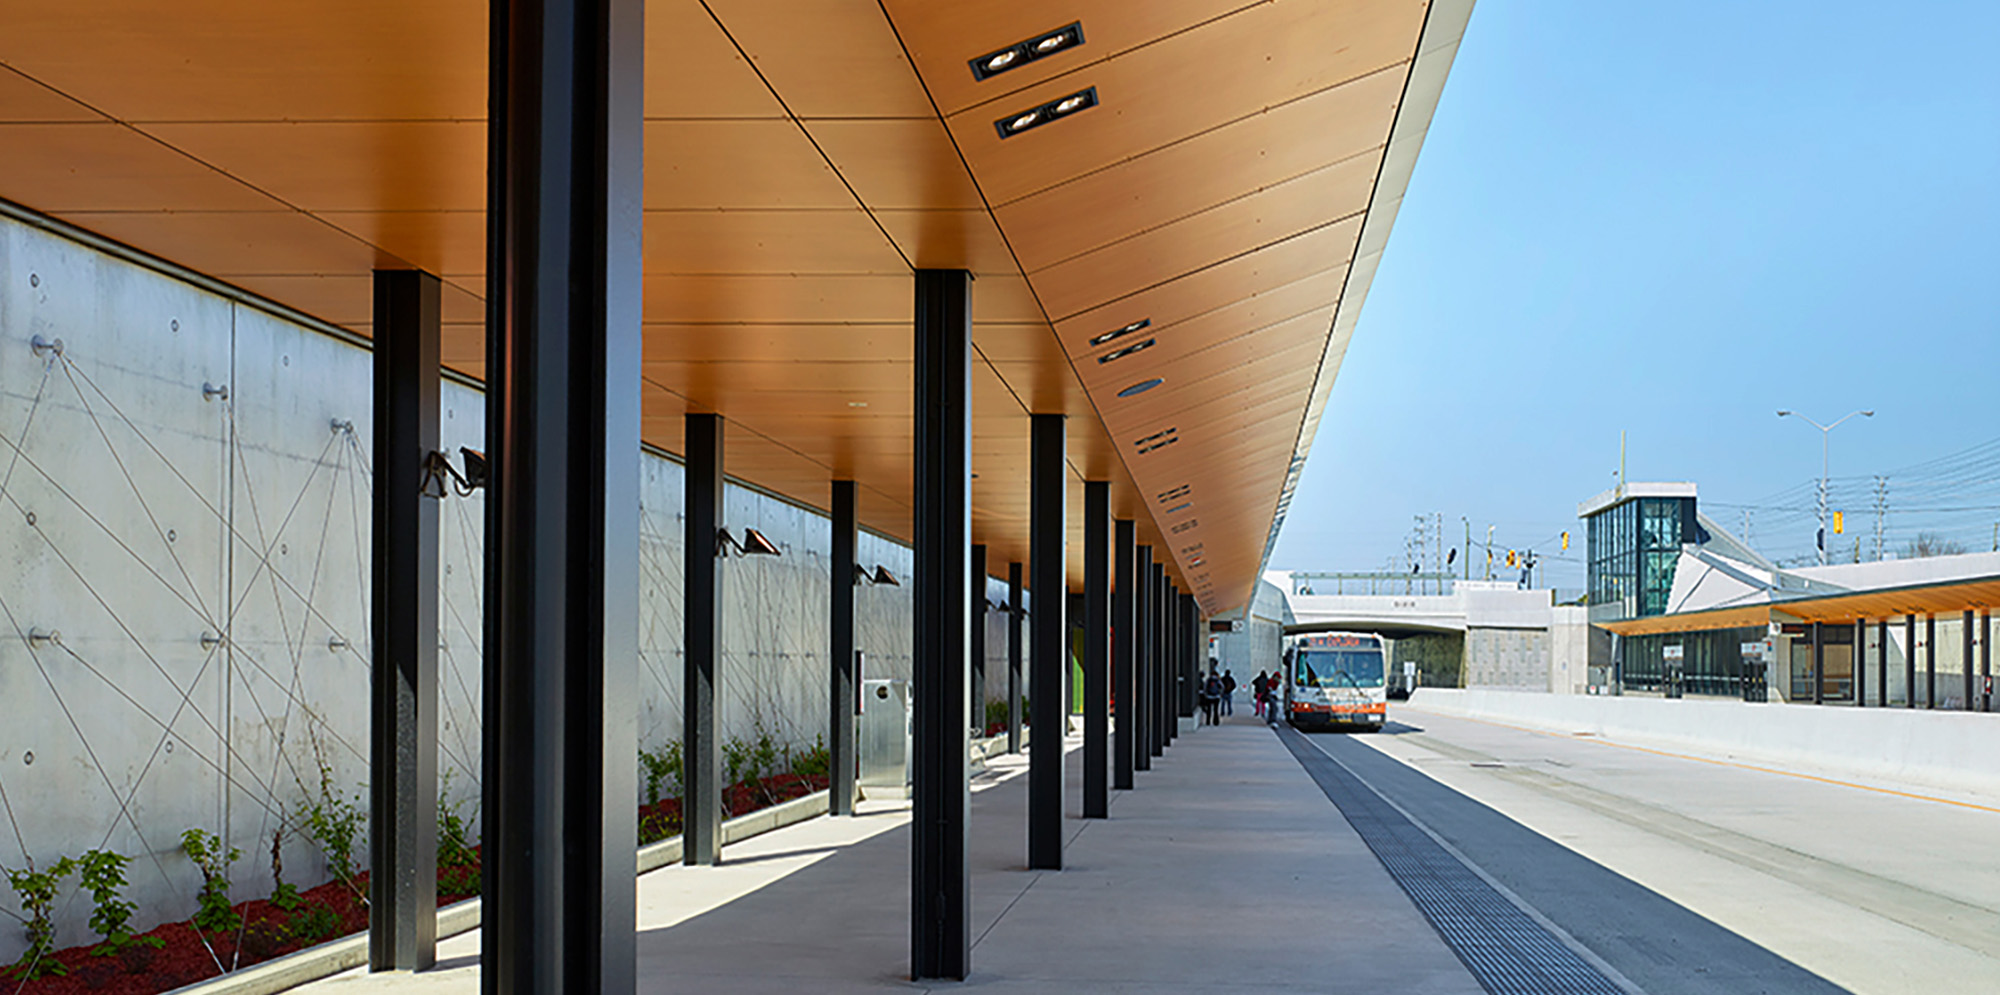 Mississauga BRT stations exterior waiting area